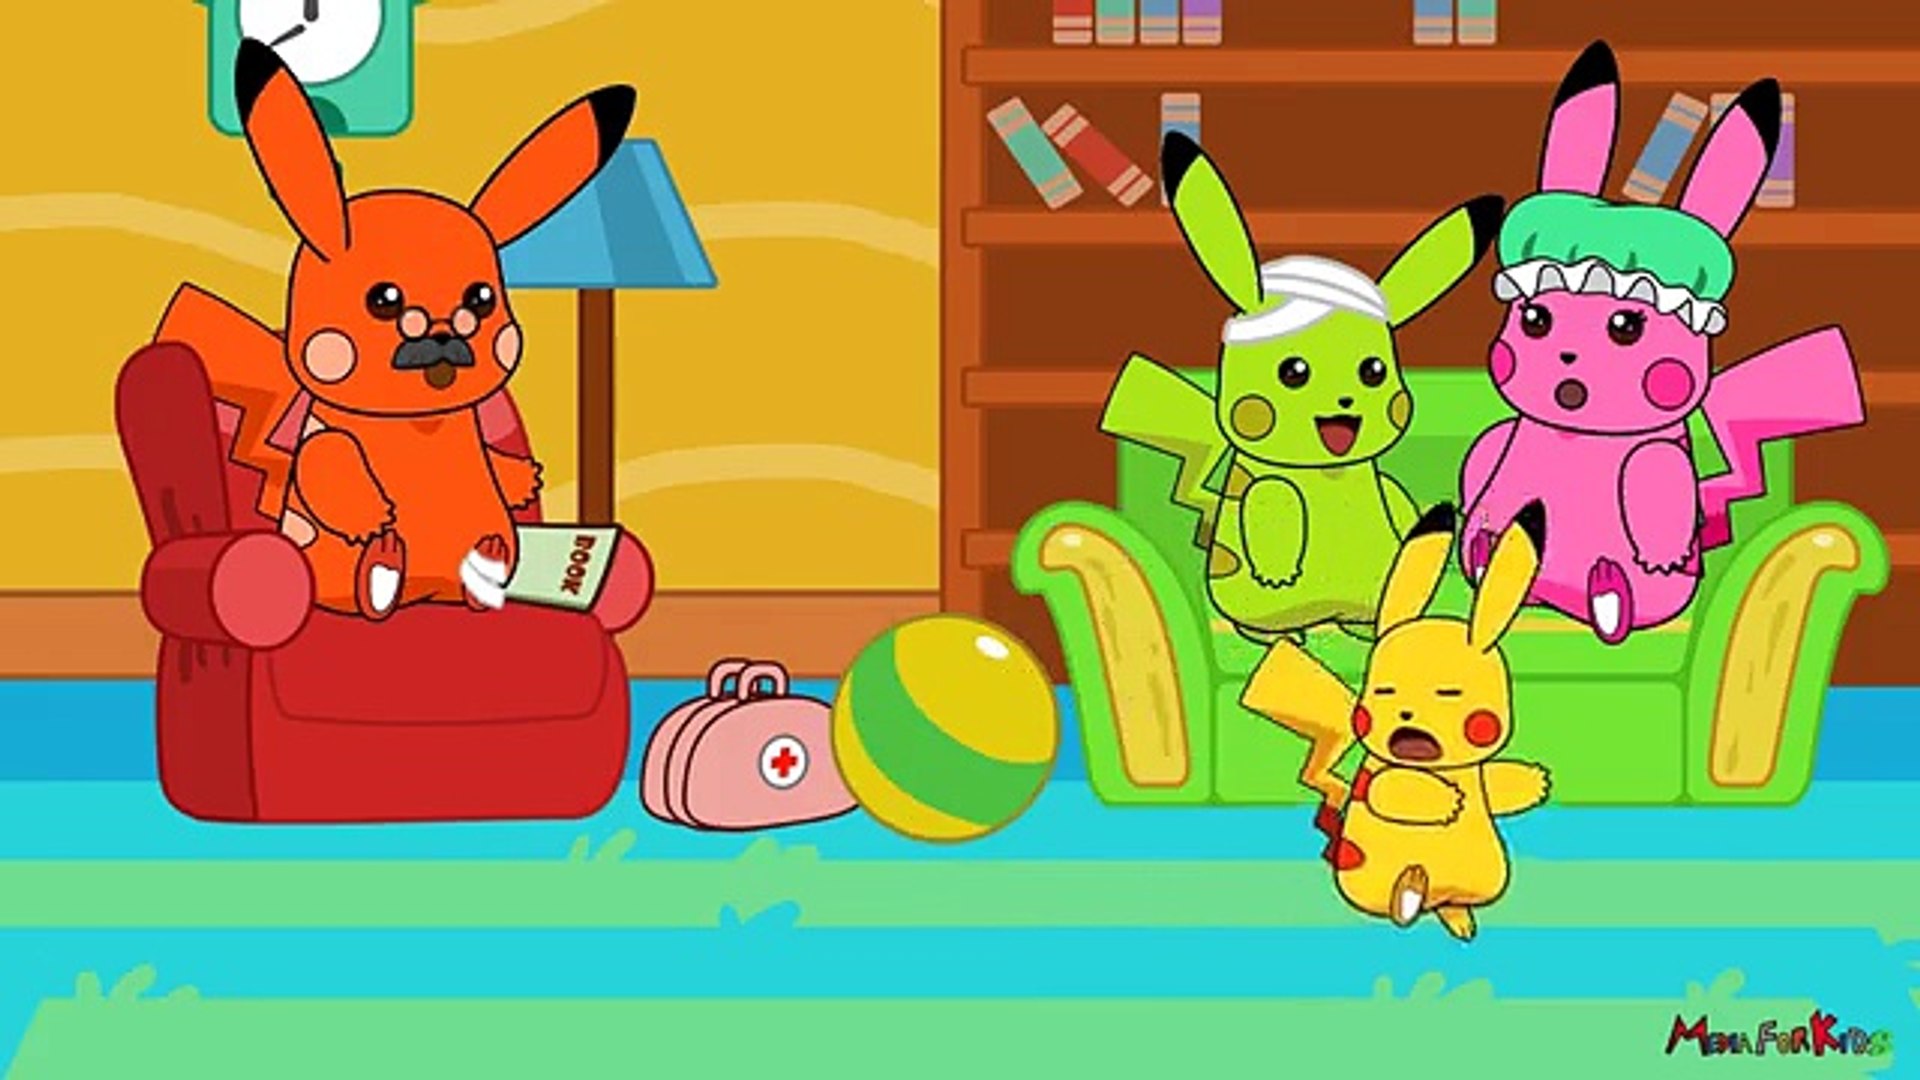 Mega Pikachu baby crying, Pikachu Pokemon Cartoon and Animation Rhymes  Songs for Kids - video Dailymotion